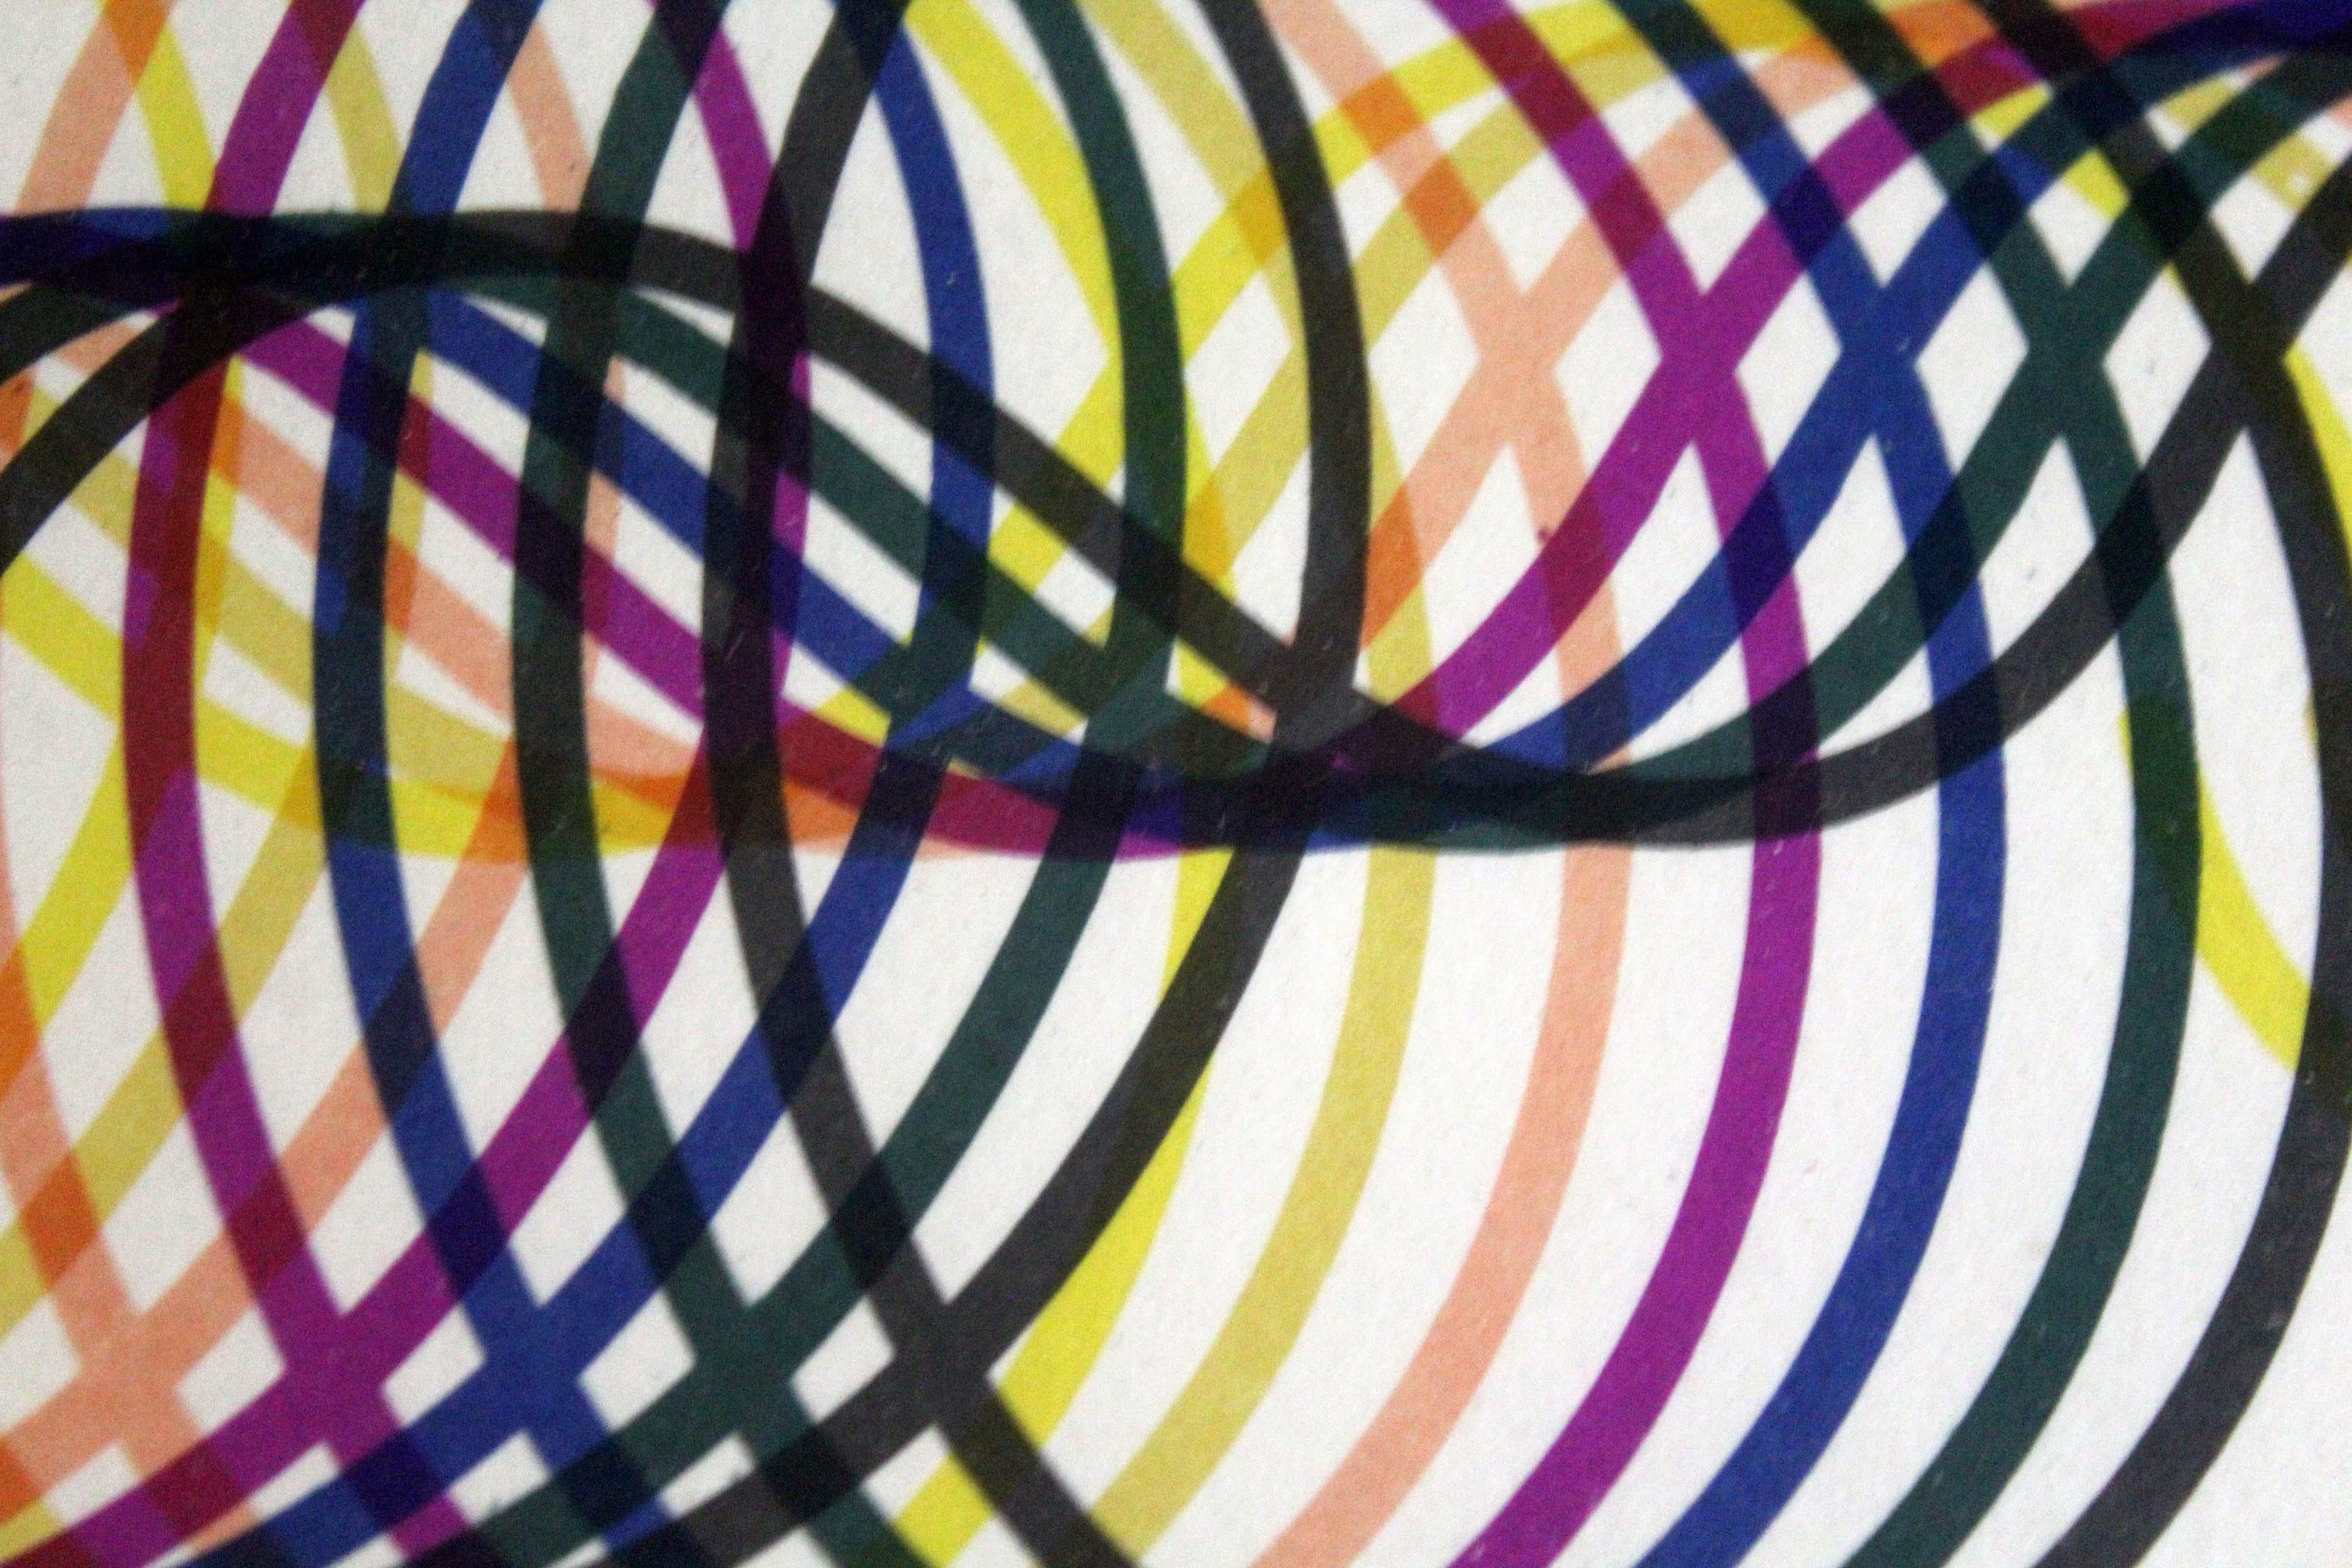 Paper Yaacov Agam Swirls from the Swirl Suite Signed Serigraph Hc 1984 Framed